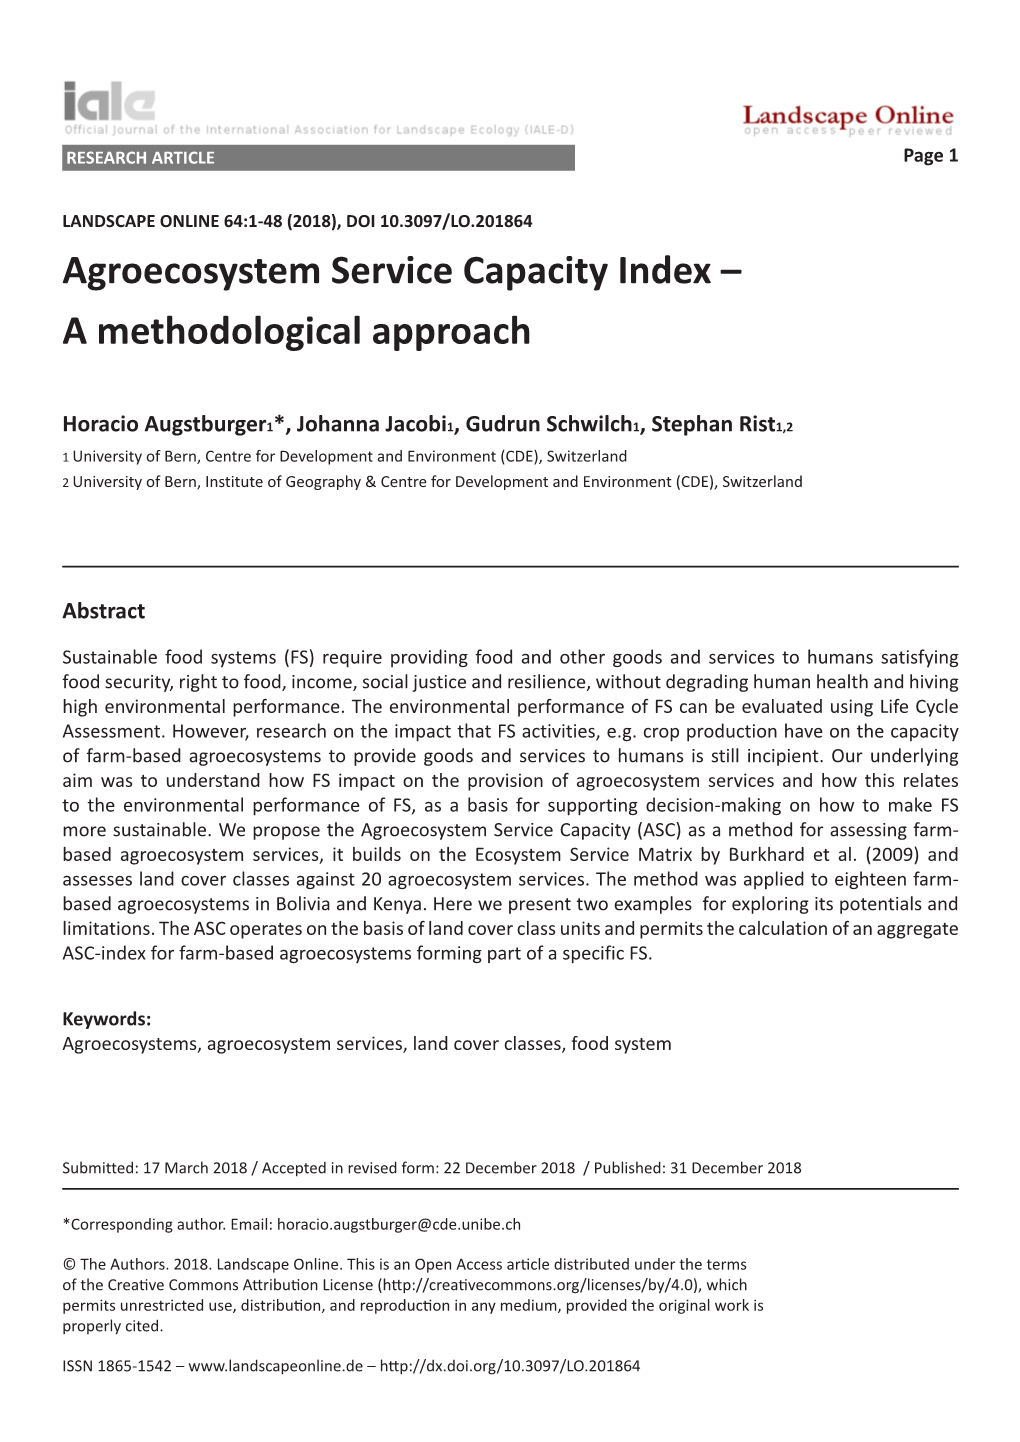 Agroecosystem Service Capacity Index – a Methodological Approach